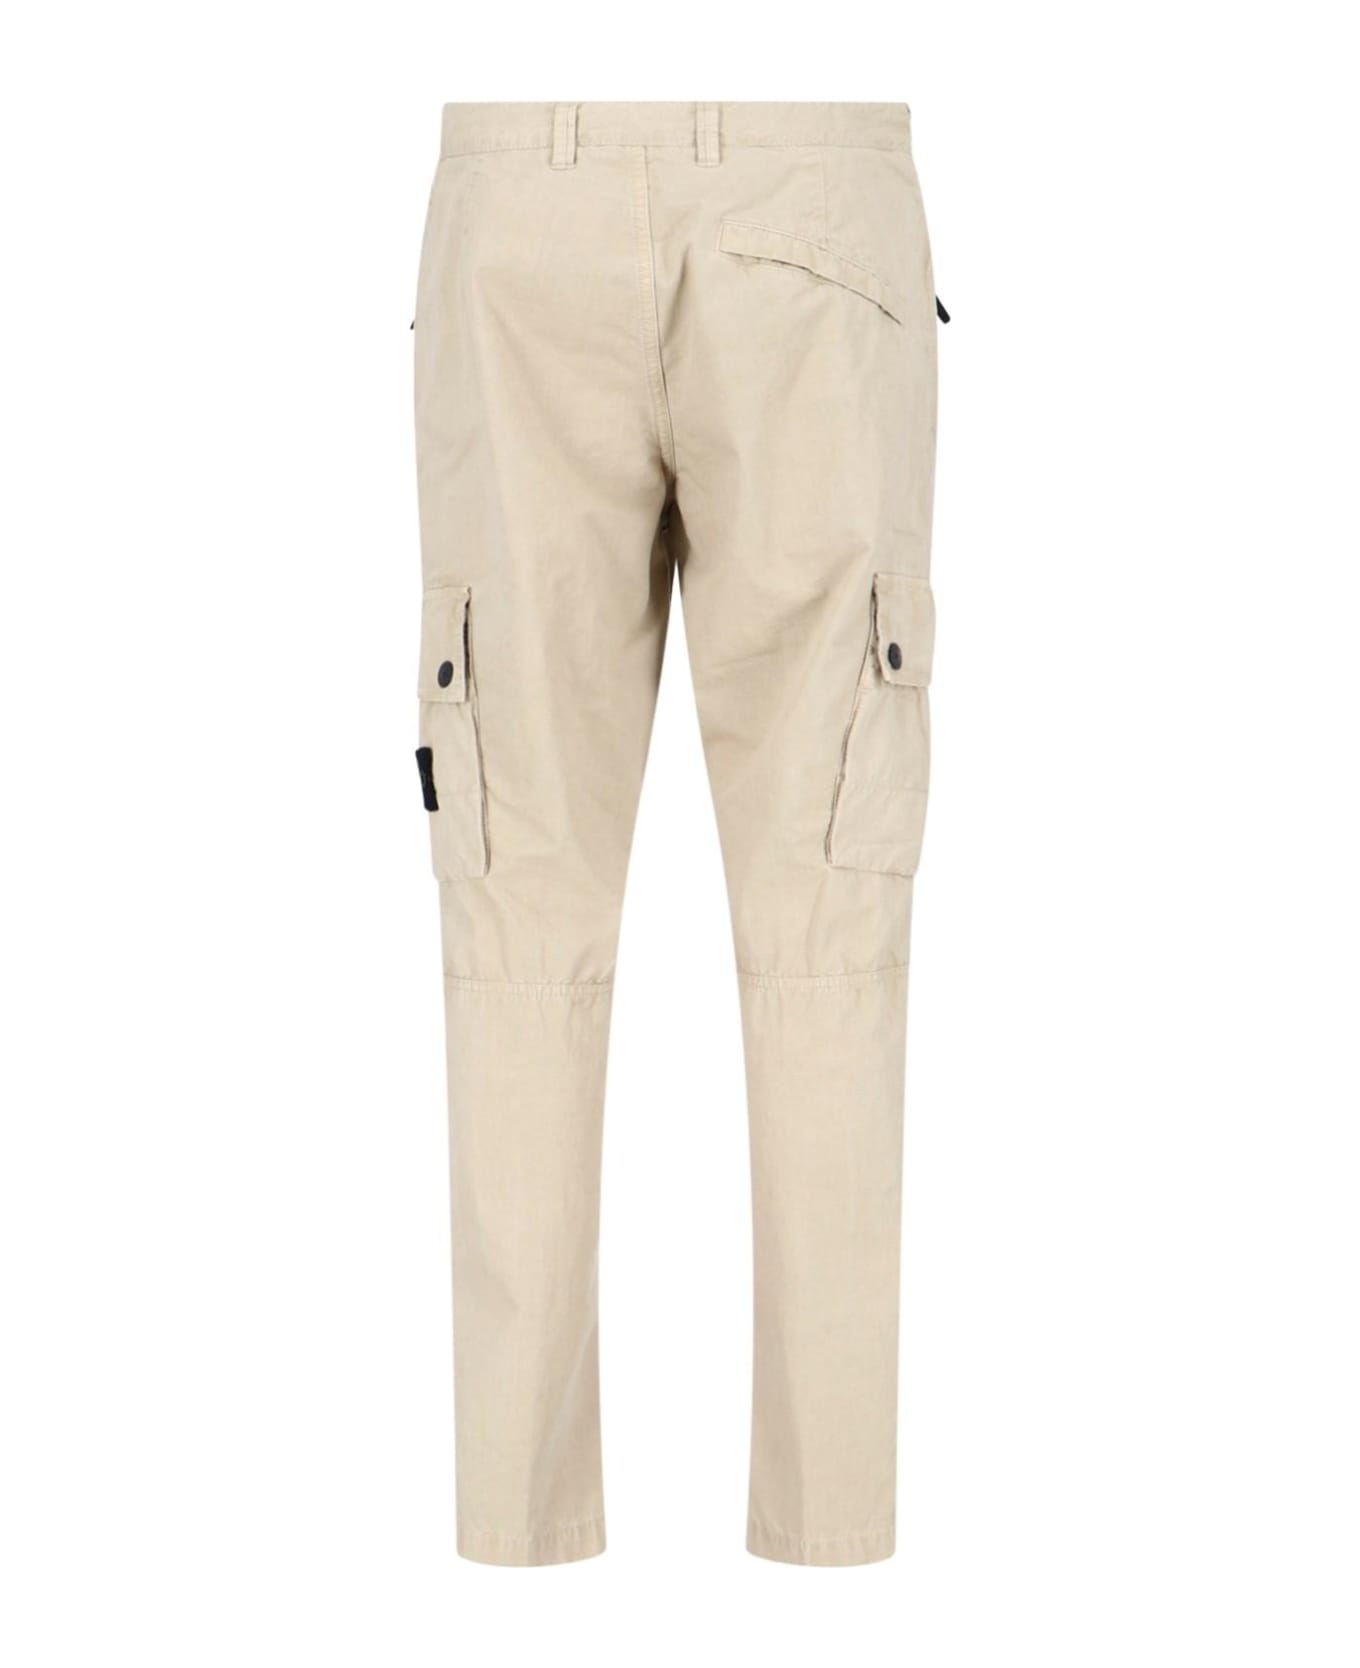 Stone Island Slim-fit Cotton Cargo Trousers - Beige ボトムス